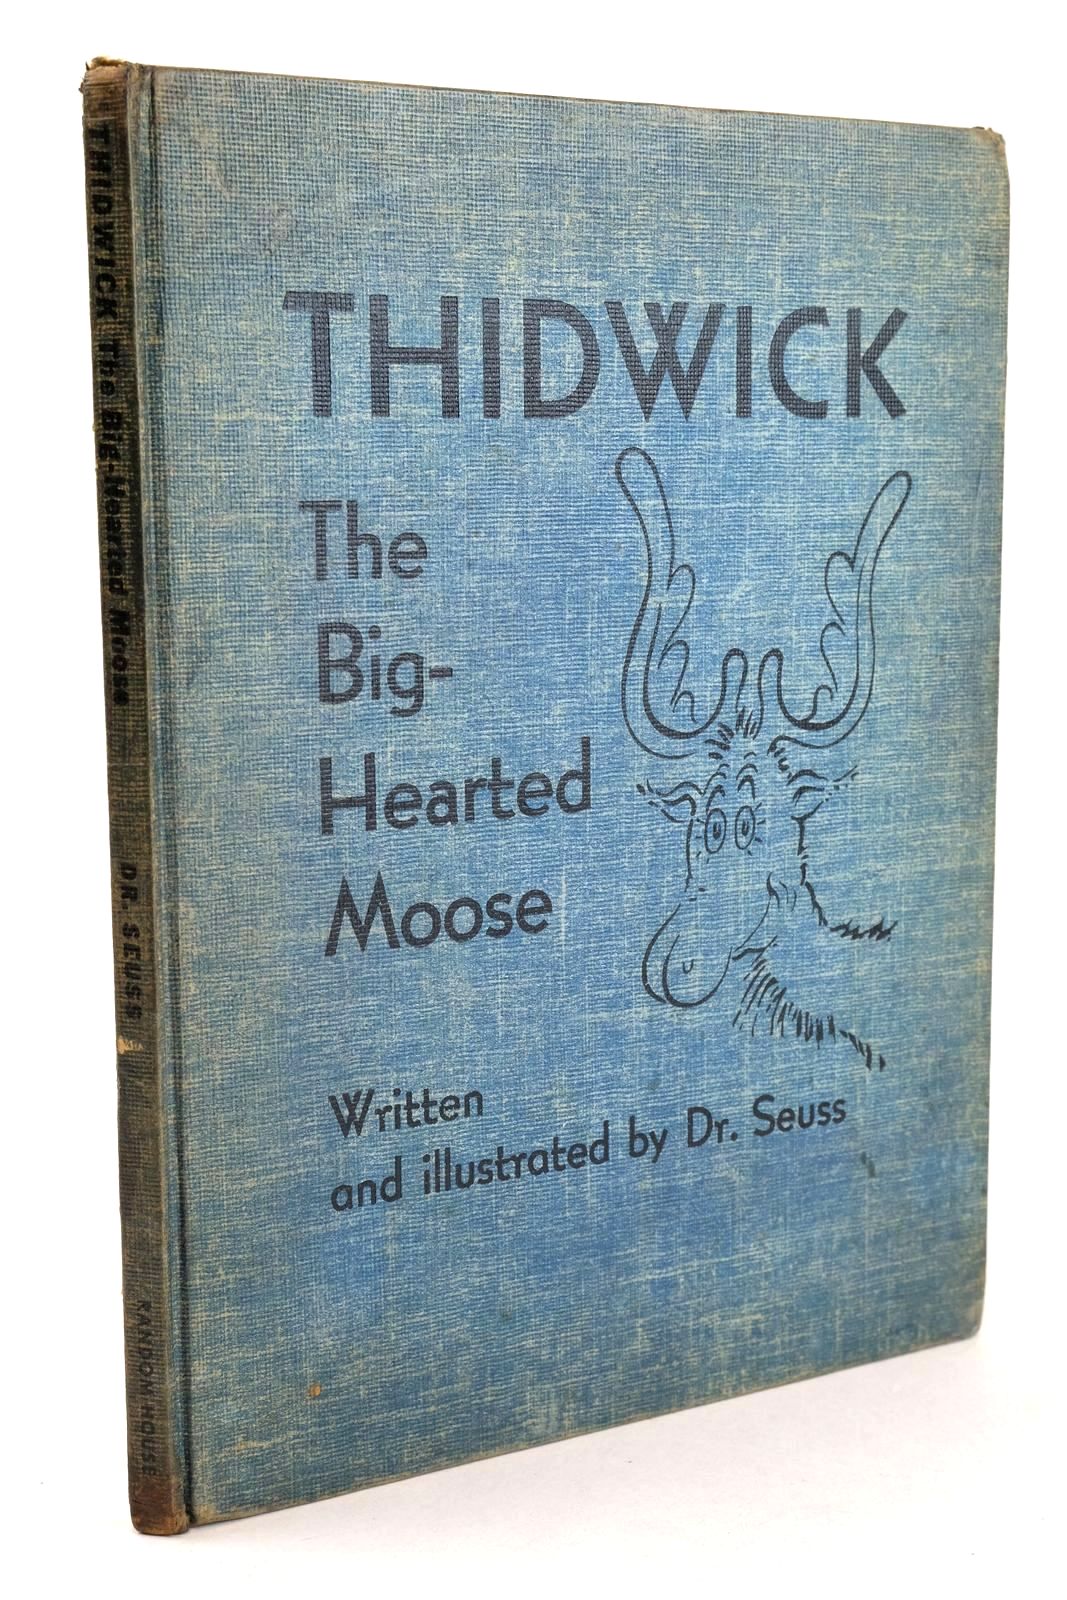 Photo of THIDWICK THE BIG-HEARTED MOOSE written by Seuss, Dr. illustrated by Seuss, Dr. published by Random House (STOCK CODE: 1326309)  for sale by Stella & Rose's Books